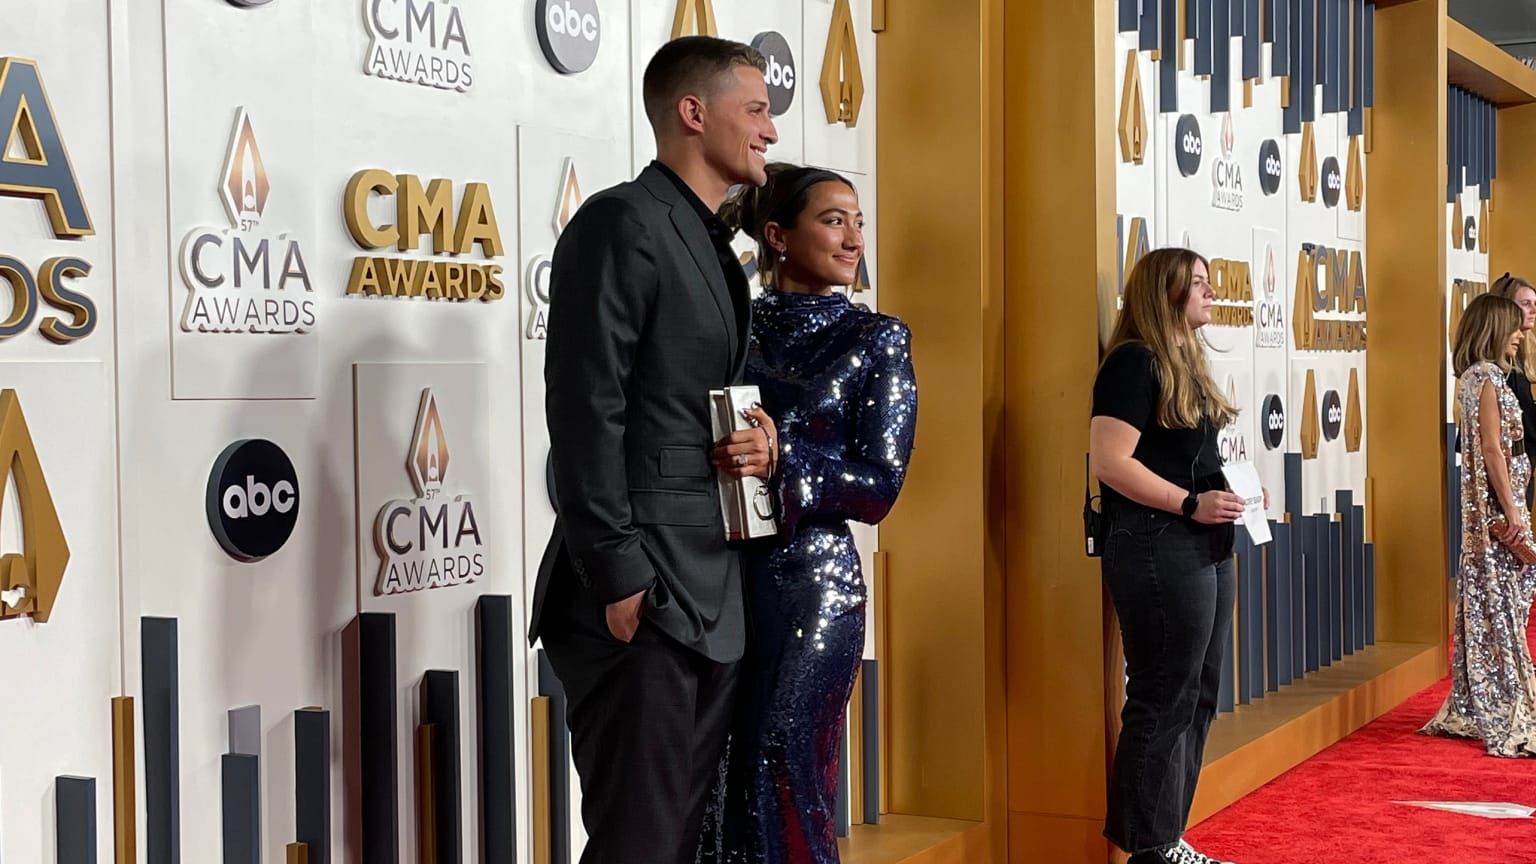 Corey Seager and his wife, Madisyn, on the CMA Awards red carpet